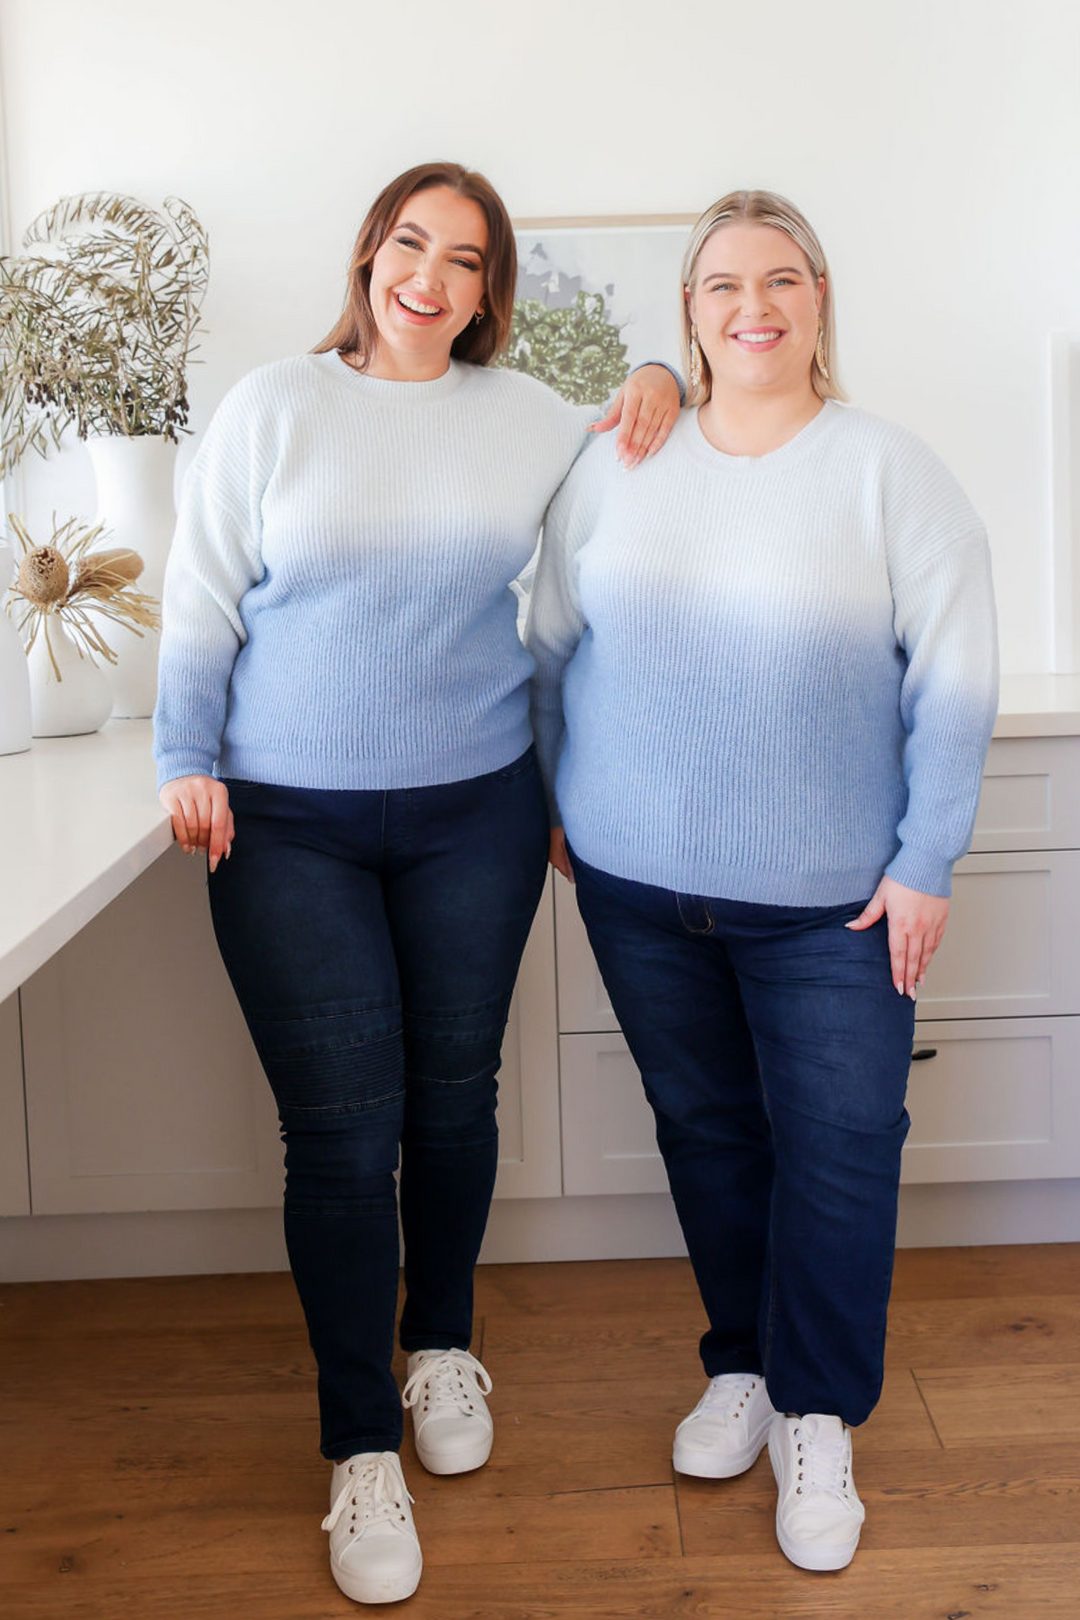 Ladies Knit Jumper - Round Neckline - Long Sleeve - Blue Ombre - Sizes S - XL - Billy Knit Jumper - Daisy's Closet Sizes S + L Paired with Dark Denim Jeans FrontFull Length View